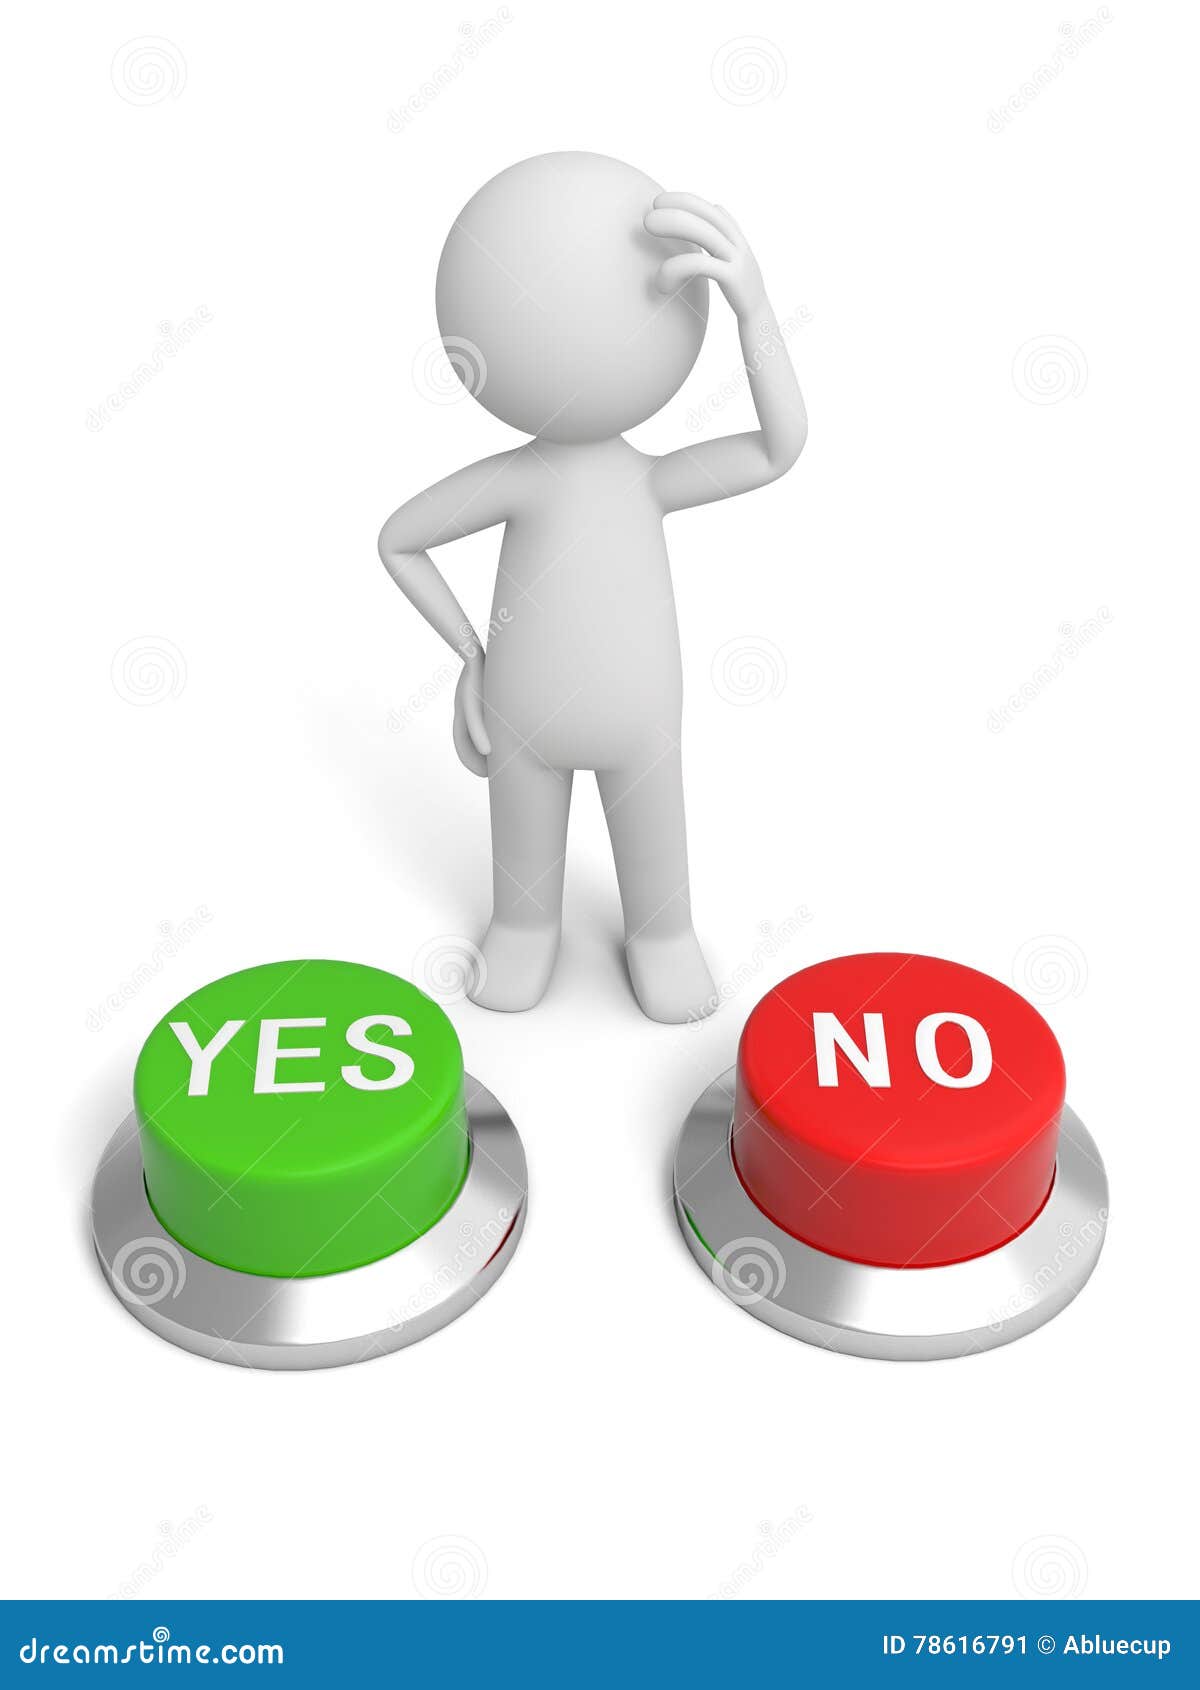 https://thumbs.dreamstime.com/z/yes-no-button-d-people-making-choice-behind-78616791.jpg